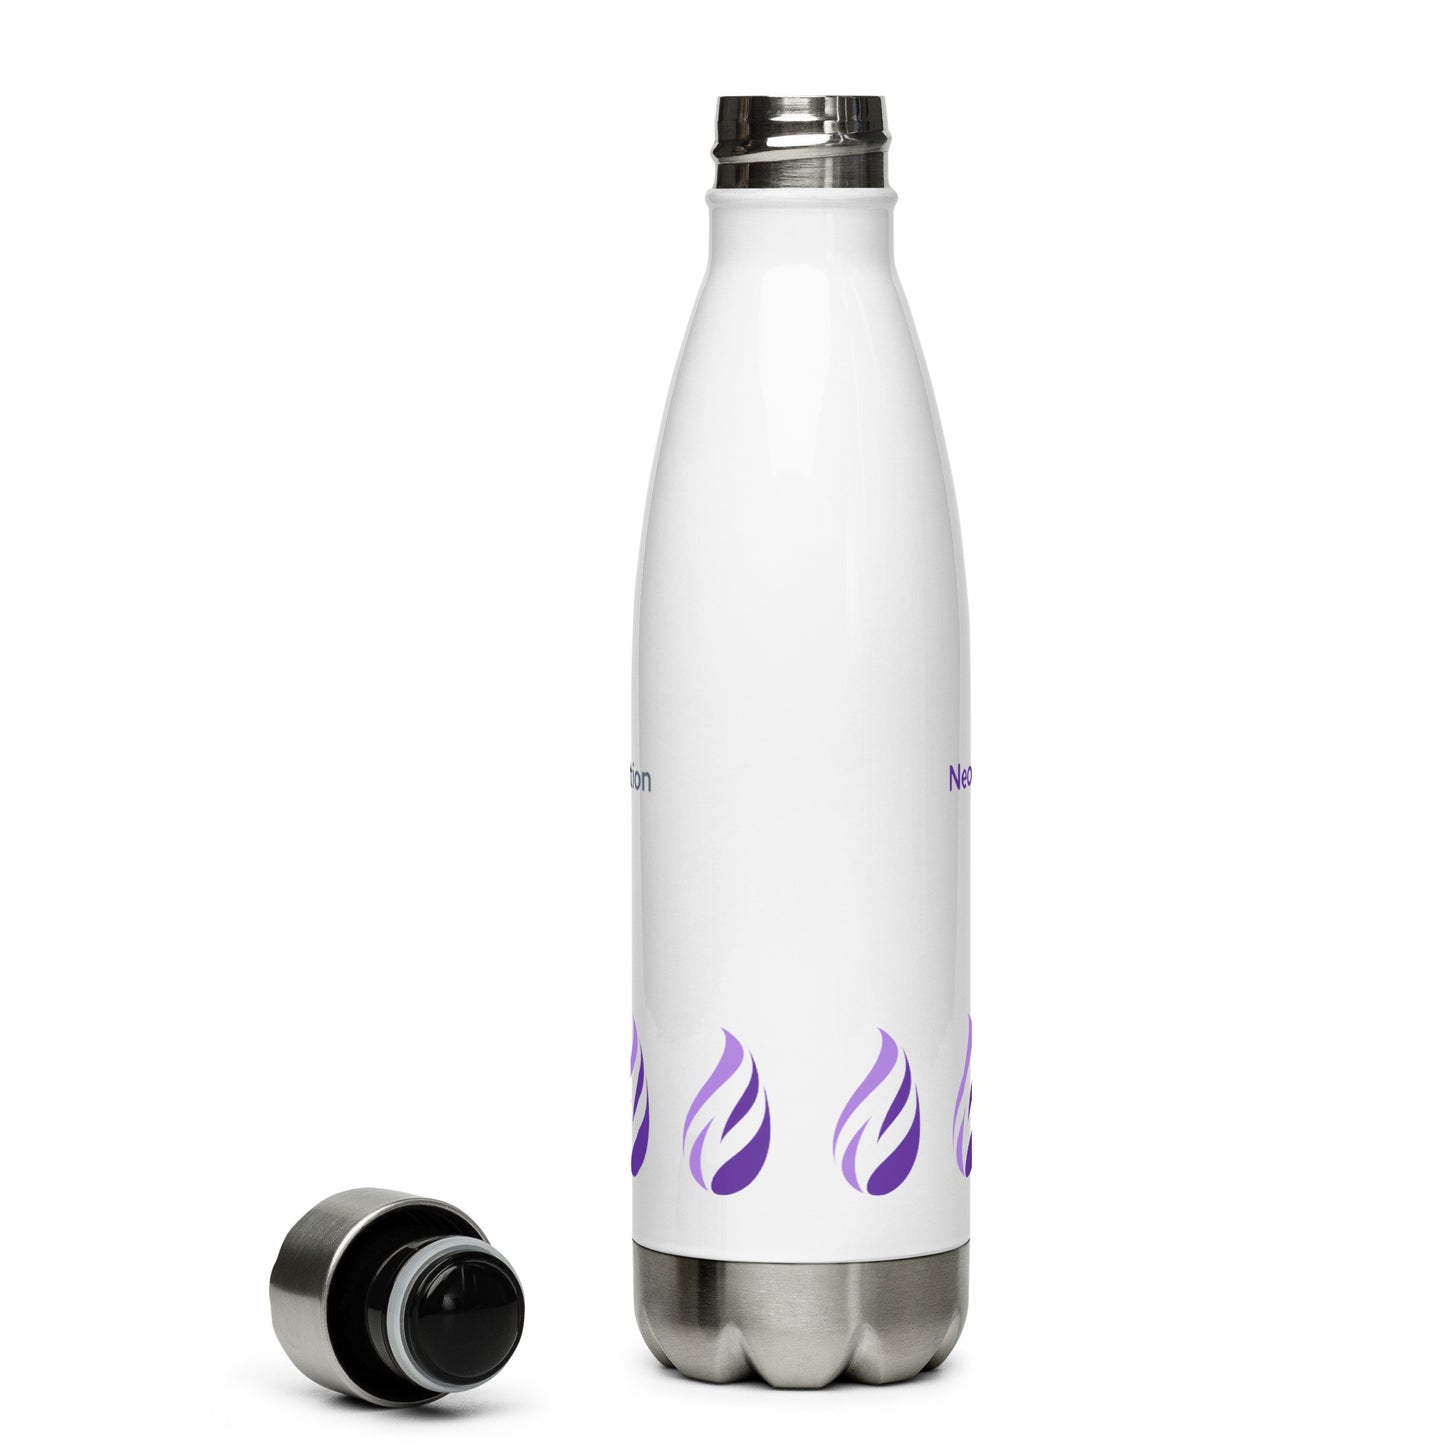 Neovation Stainless Steel Water Bottle